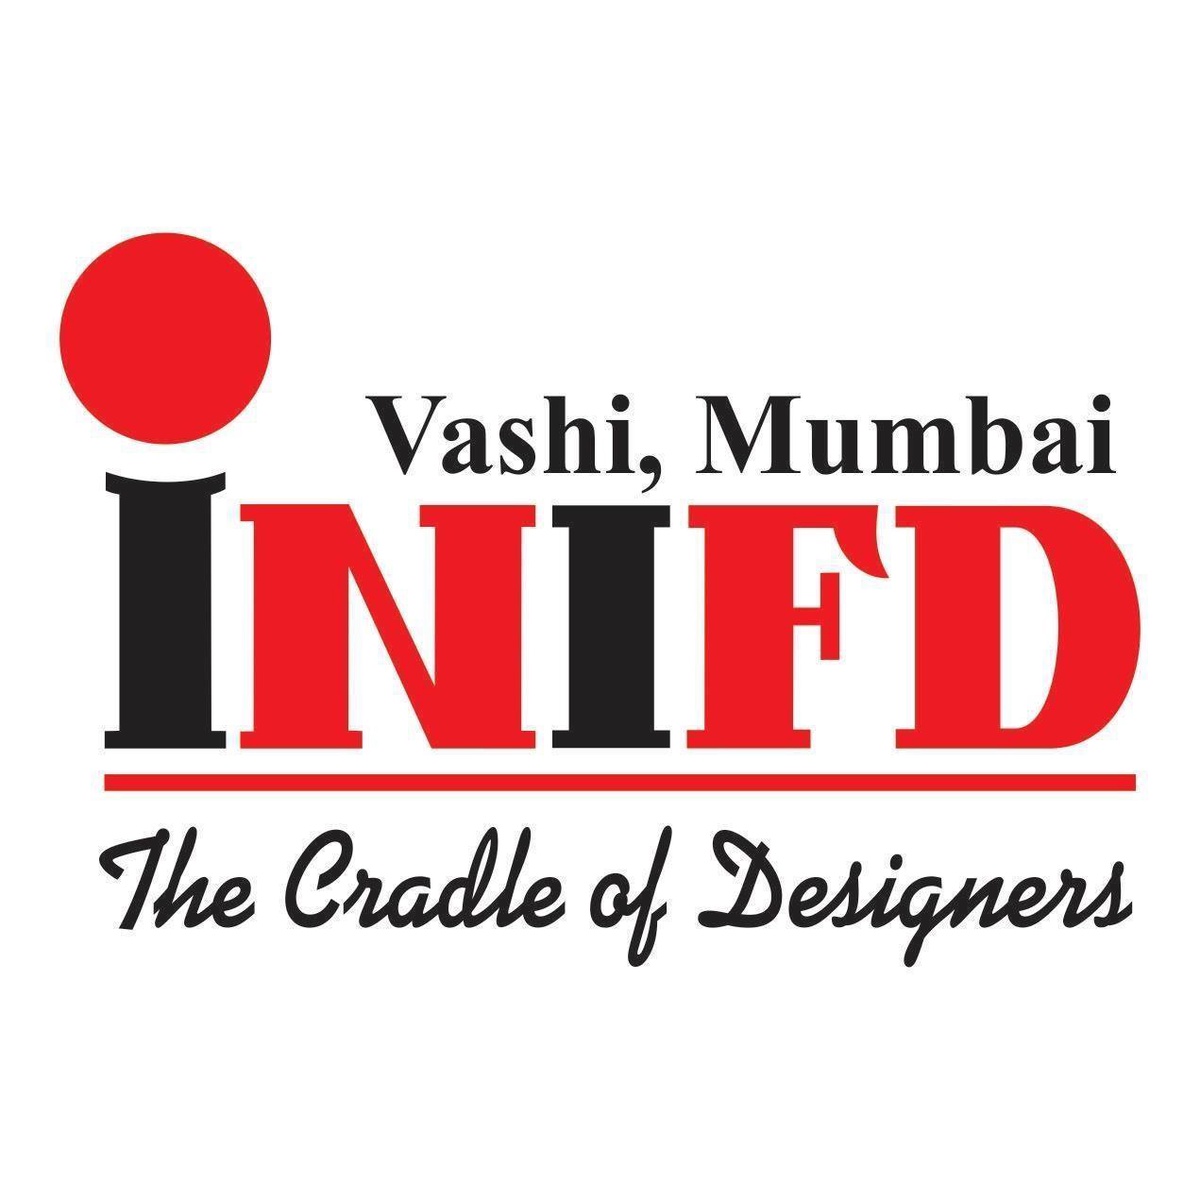 Your Creativity with the Best Interior Design Course in Mumbai - INIFD Vashi